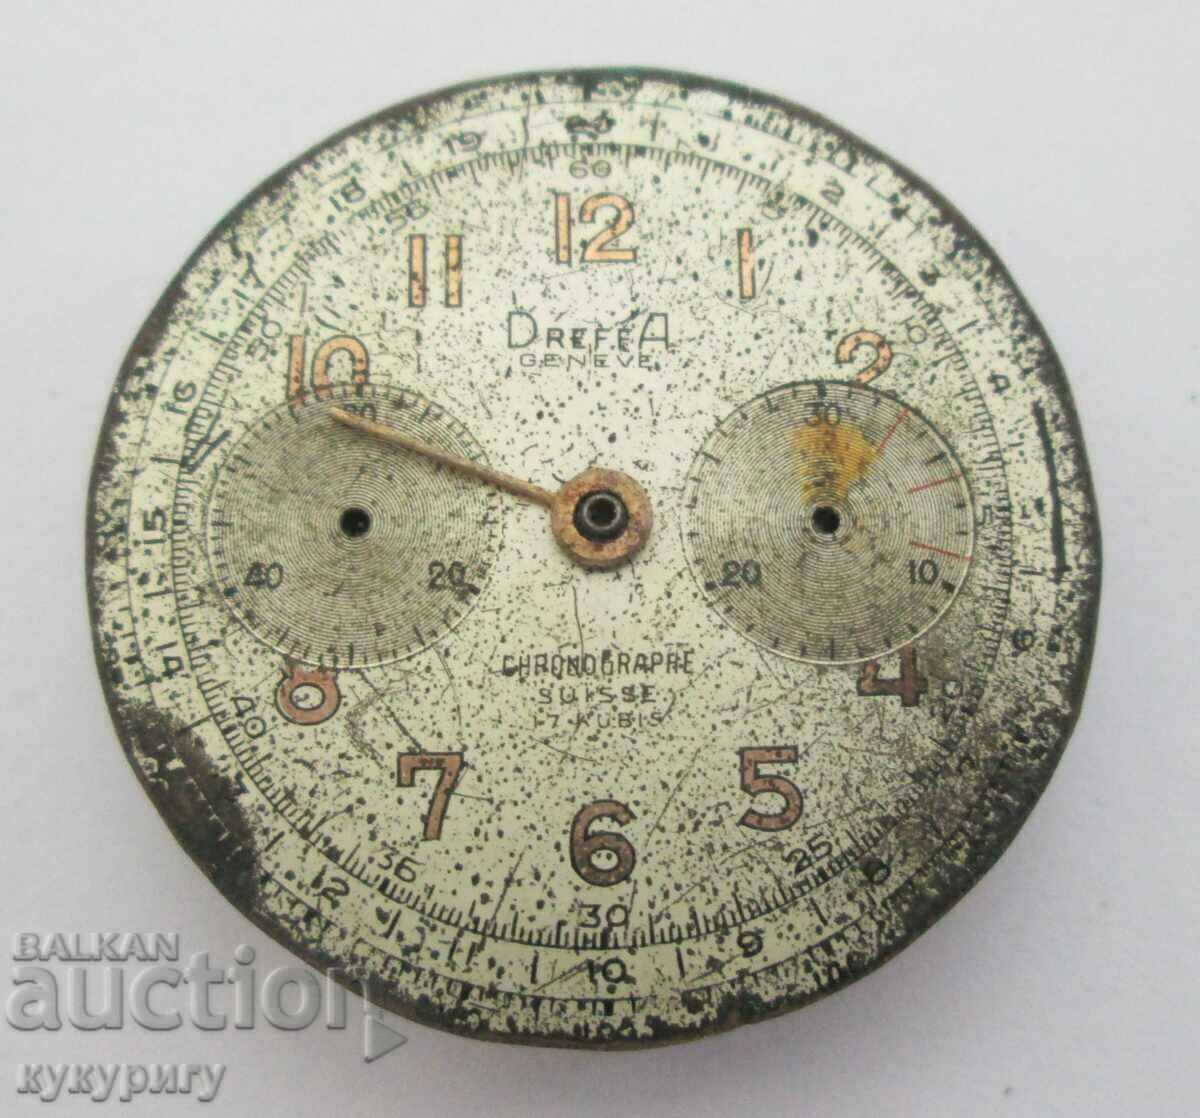 Old Swiss mechanical chronograph watch for parts